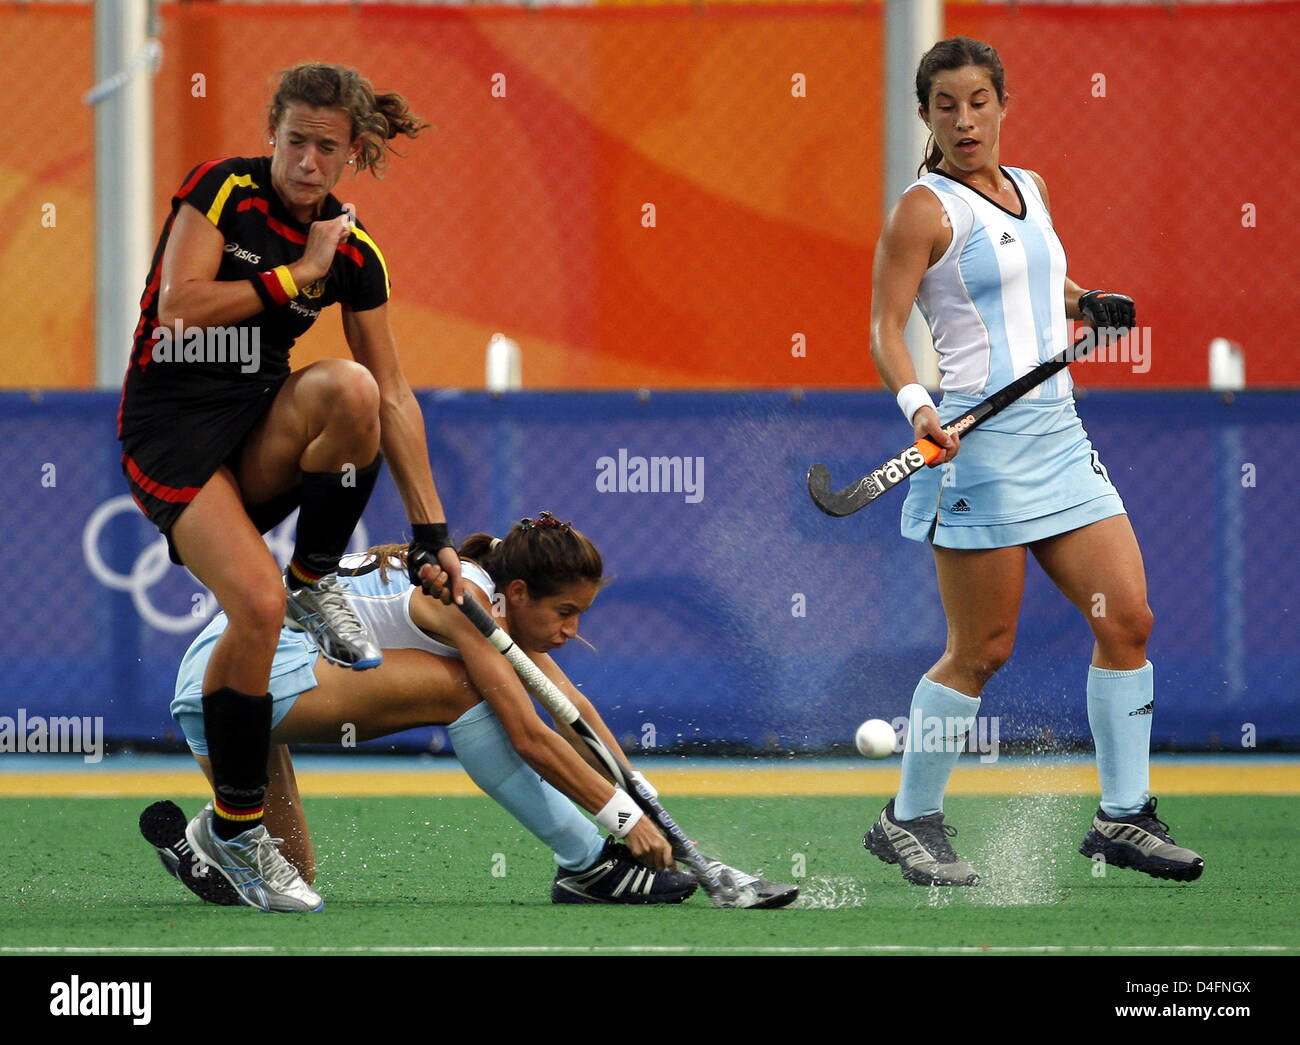 Janne Mueller-Wieland (L) of Germany vies with Giselle Kanevsky (C) and Rosario Luchetti (R) of Argentina during the womenÒs hockey preliminary match W21 between Germany and Argentina competition at the Beijing 2008 Olympic Games, Beijing, China, 16 August 2008. Photo: Marcus Brandt dpa ###dpa### Stock Photo